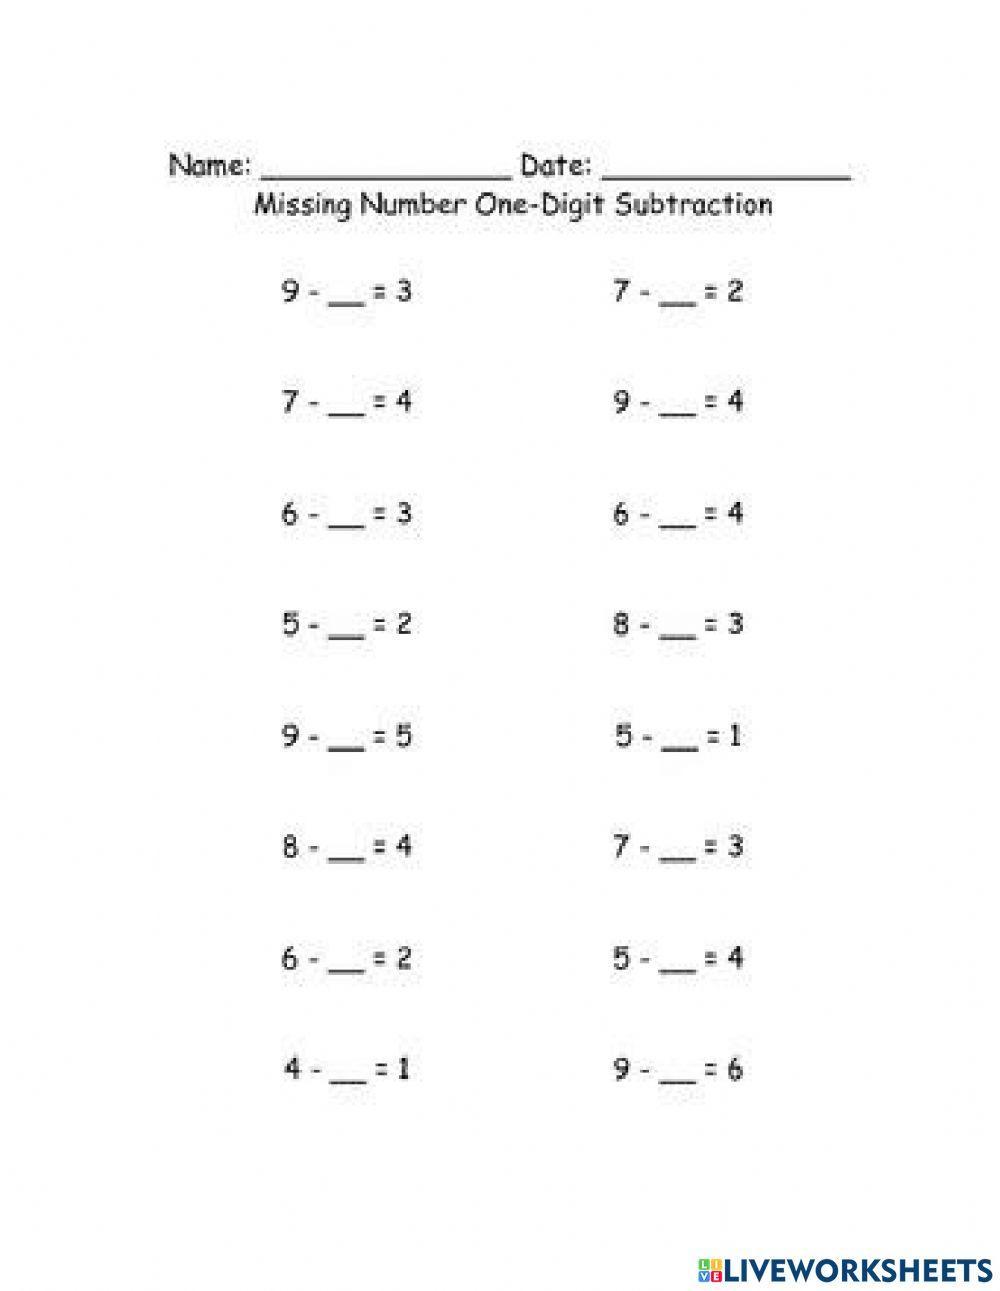 Subtraction with a missing number